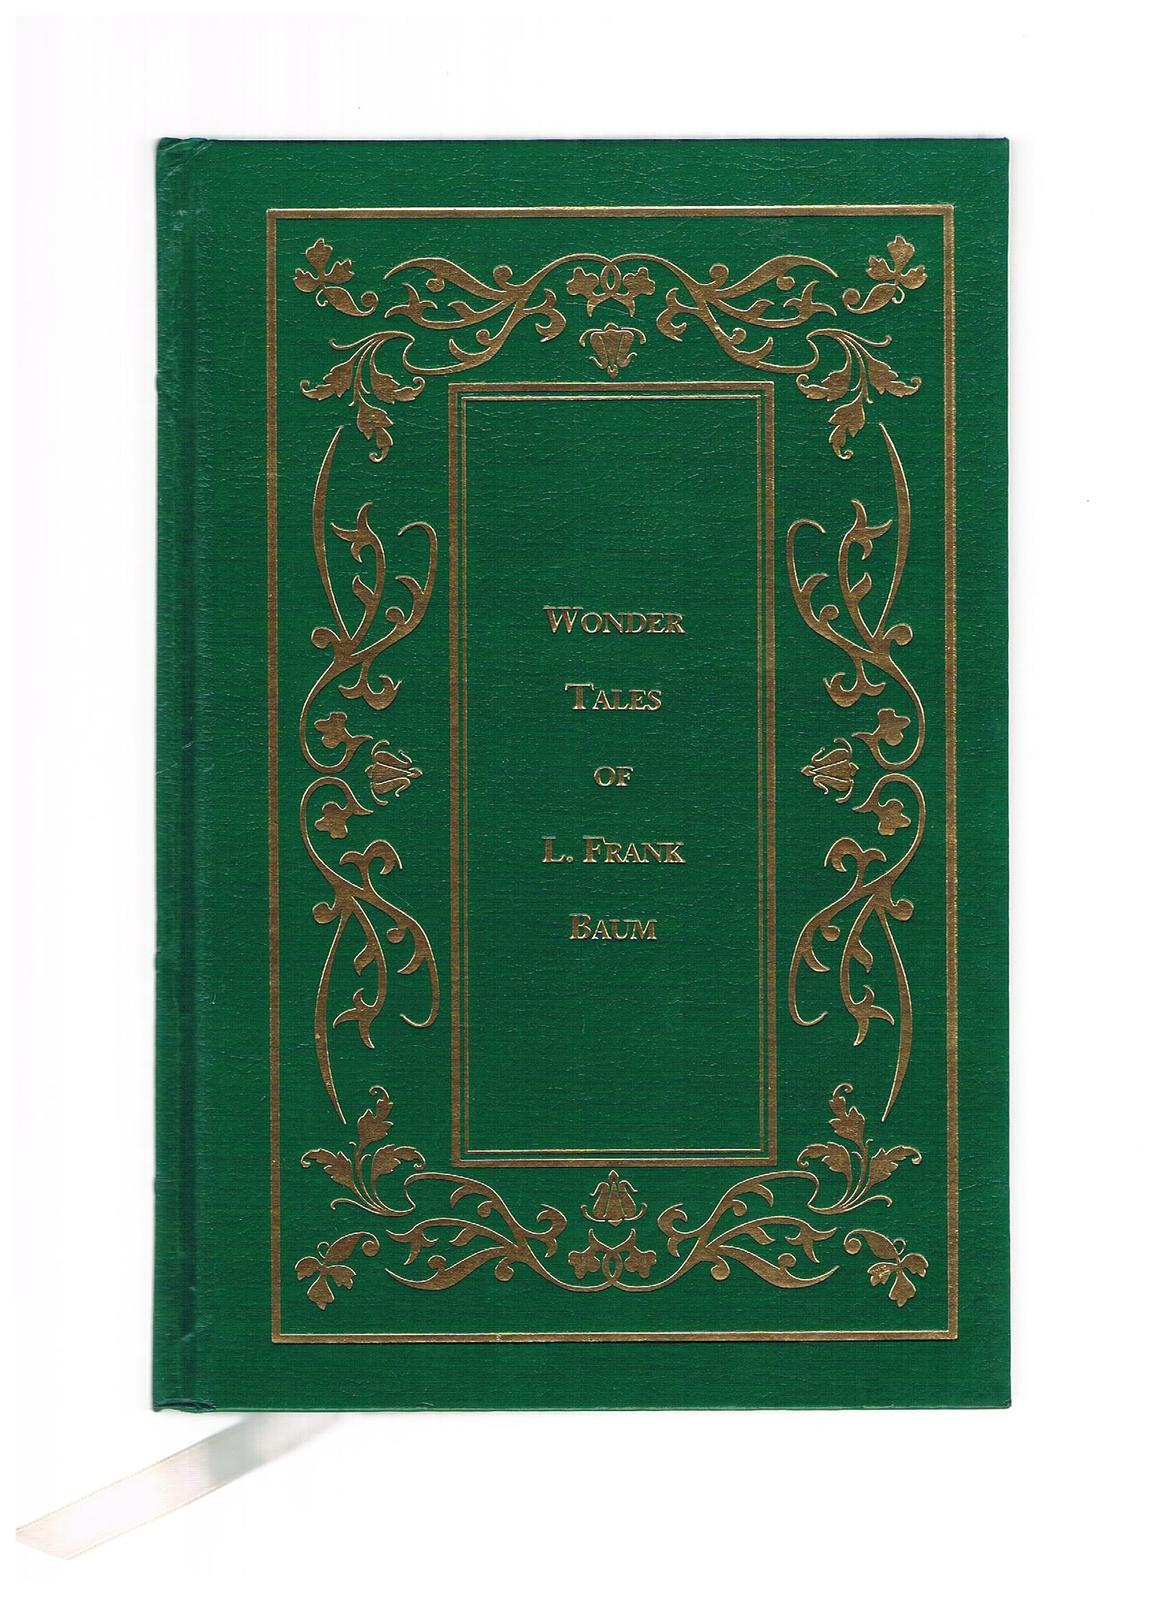 Primary image for Wonder Tales of L. Frank Baum  1st Ed.   2004   Leather Bound